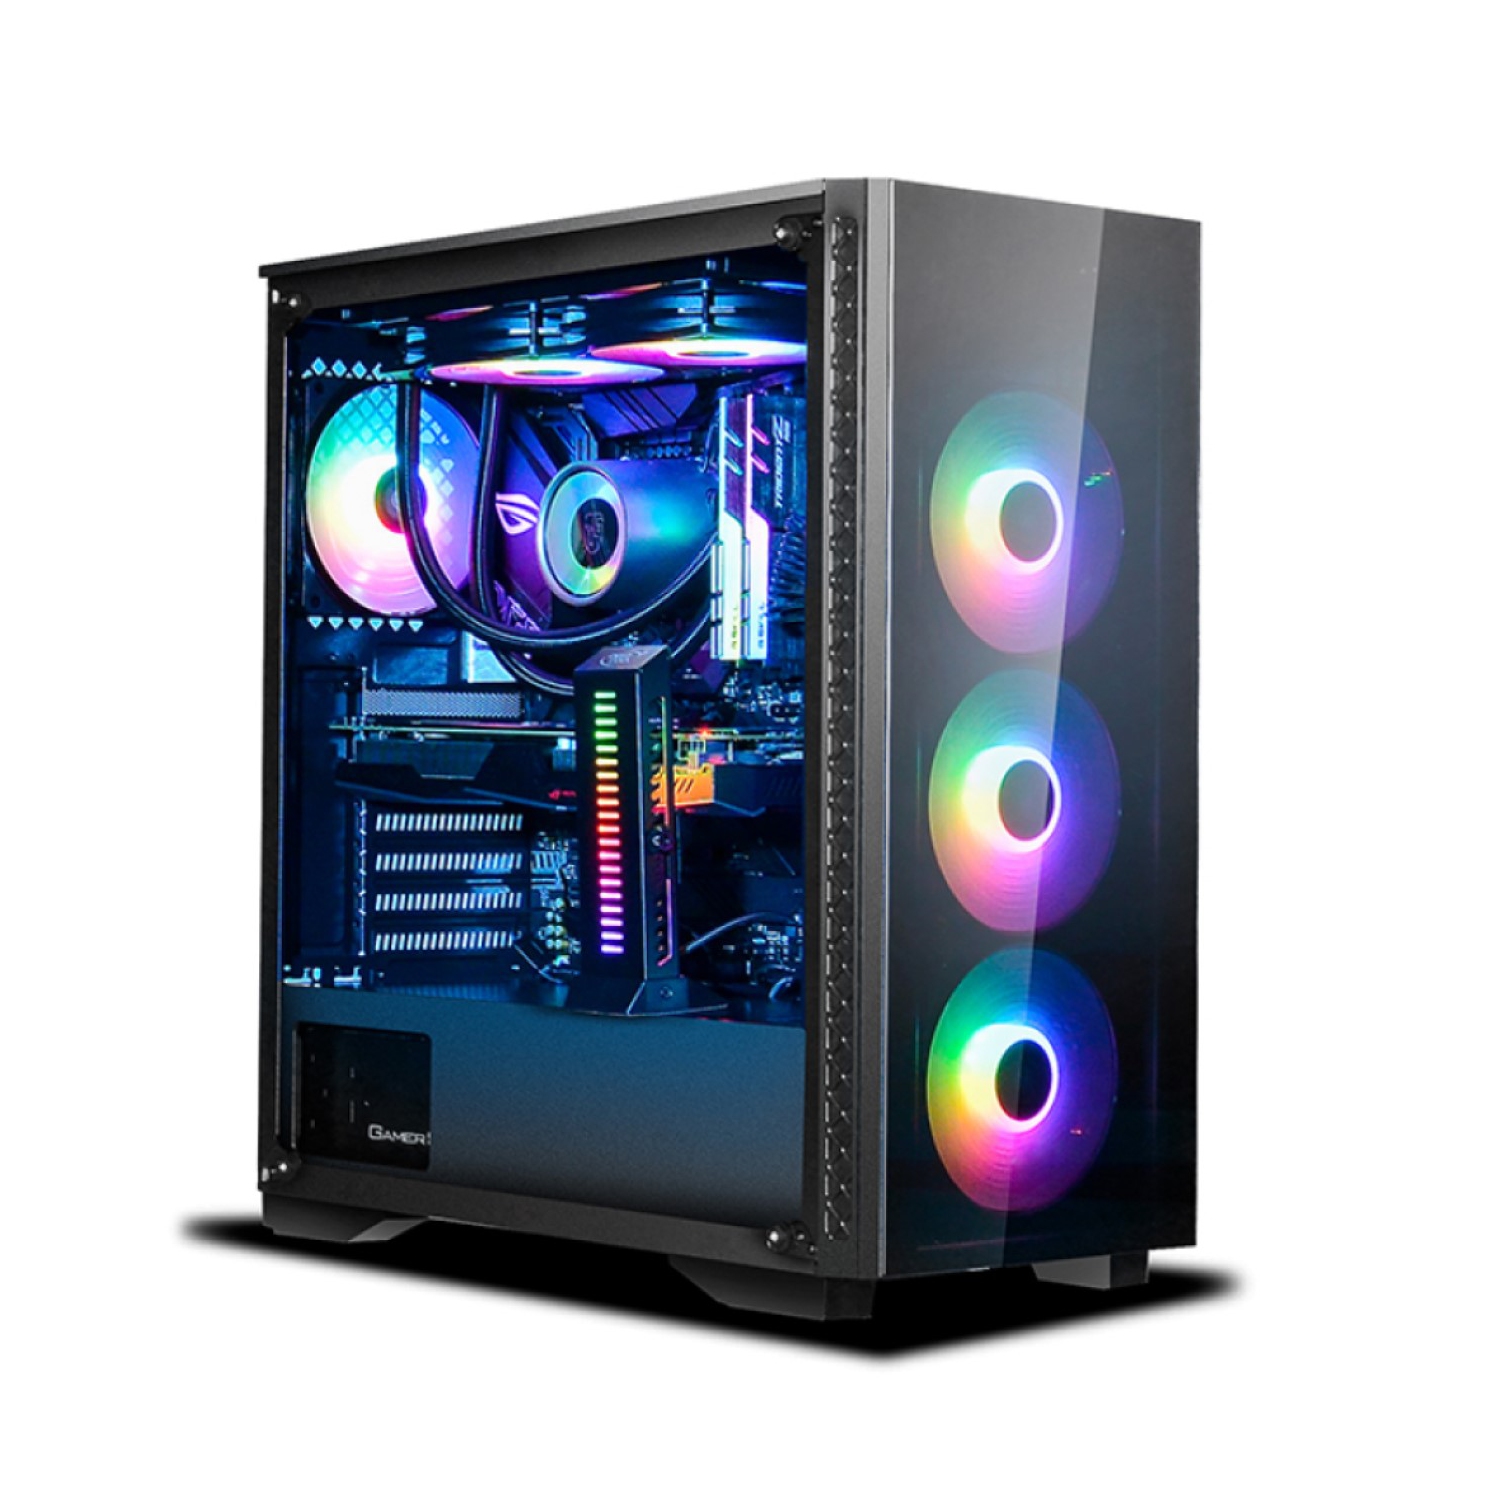 ZONIC Gaming PC | AMD Ryzen 5 5600G Processor 3.9GHz| 32 GB DDR4 RAM | 1TB M.2 SSD| GeForce RTX 3070 8GB GDDR6| Wi-Fi built-in| Windows 11- Gaming Keyboard Mouse and Headset Kit